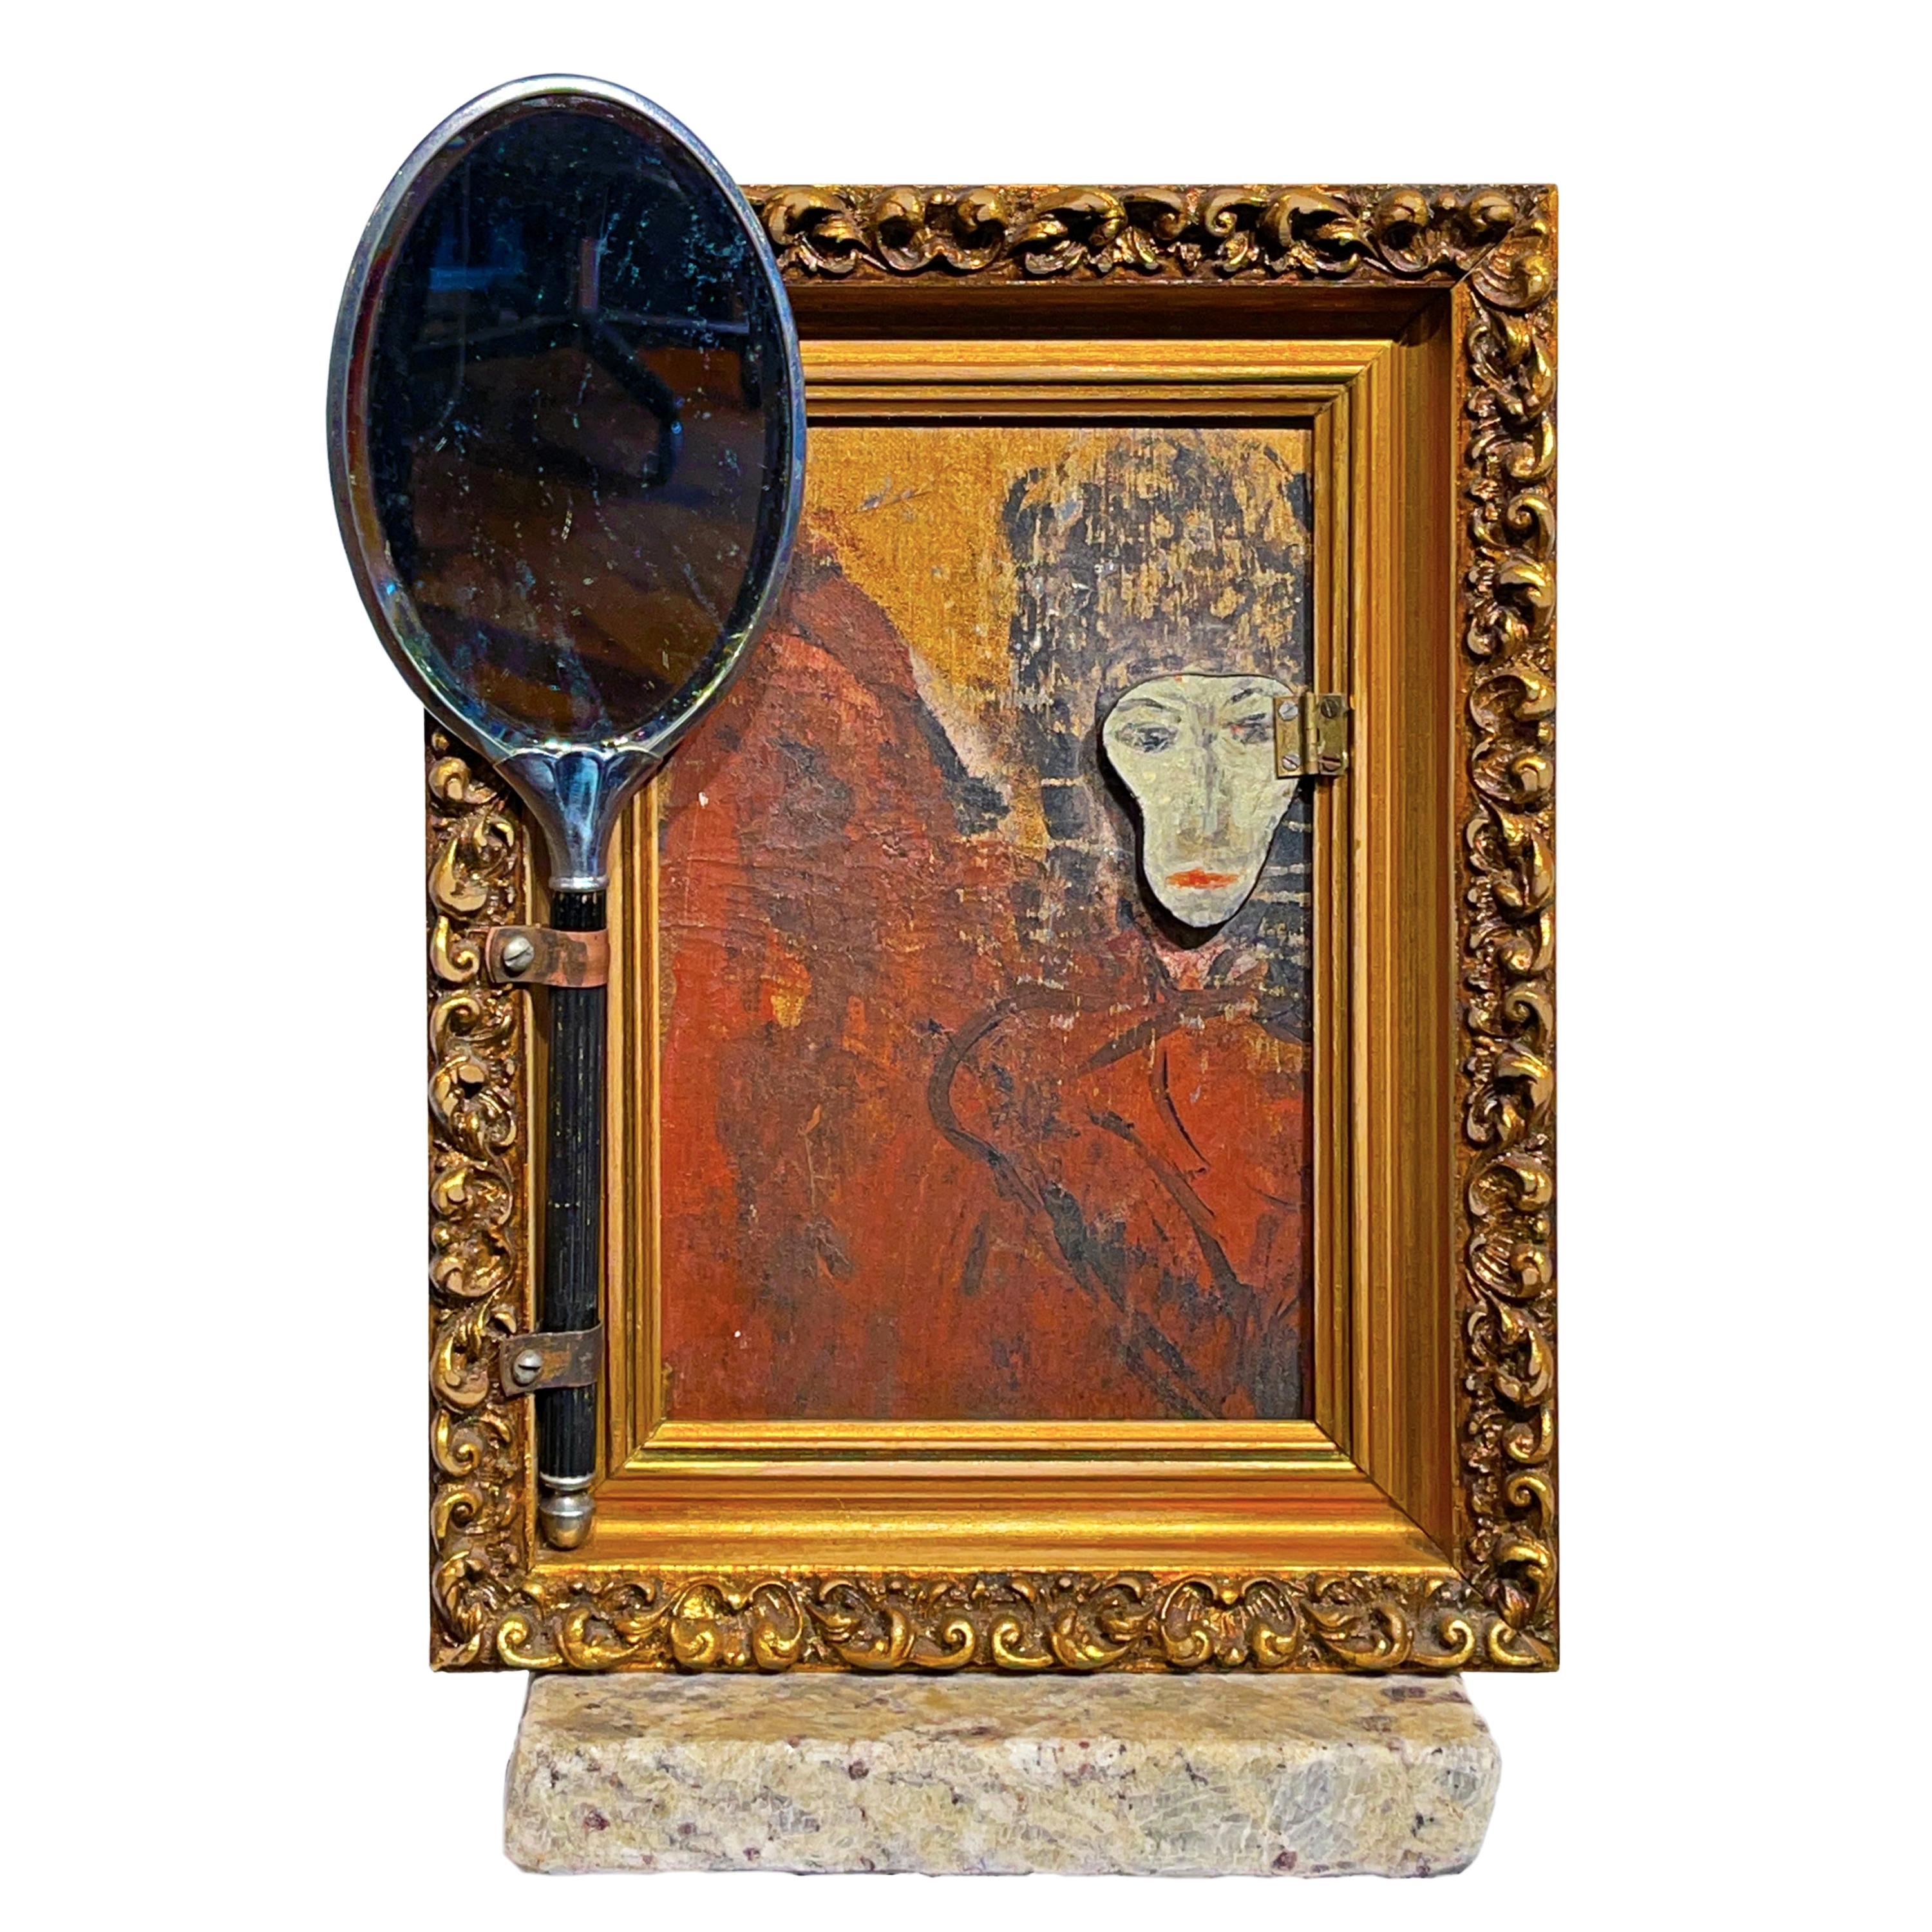 Vanity Mirror, "The Mask I Wear", Sculptural Mirror Object with Painting